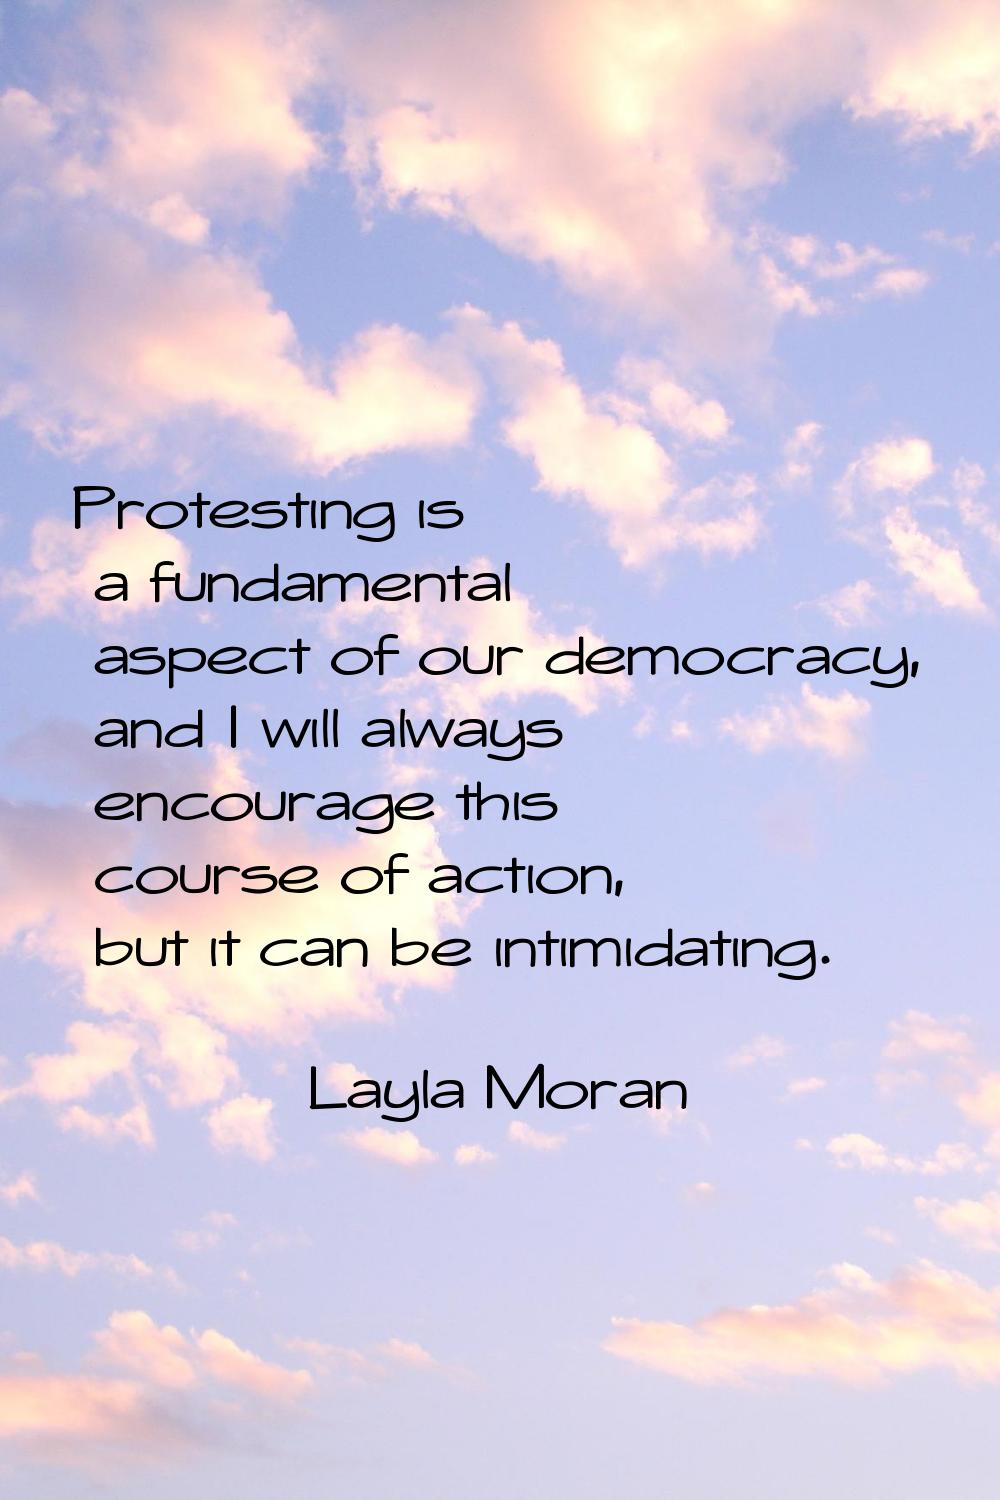 Protesting is a fundamental aspect of our democracy, and I will always encourage this course of act